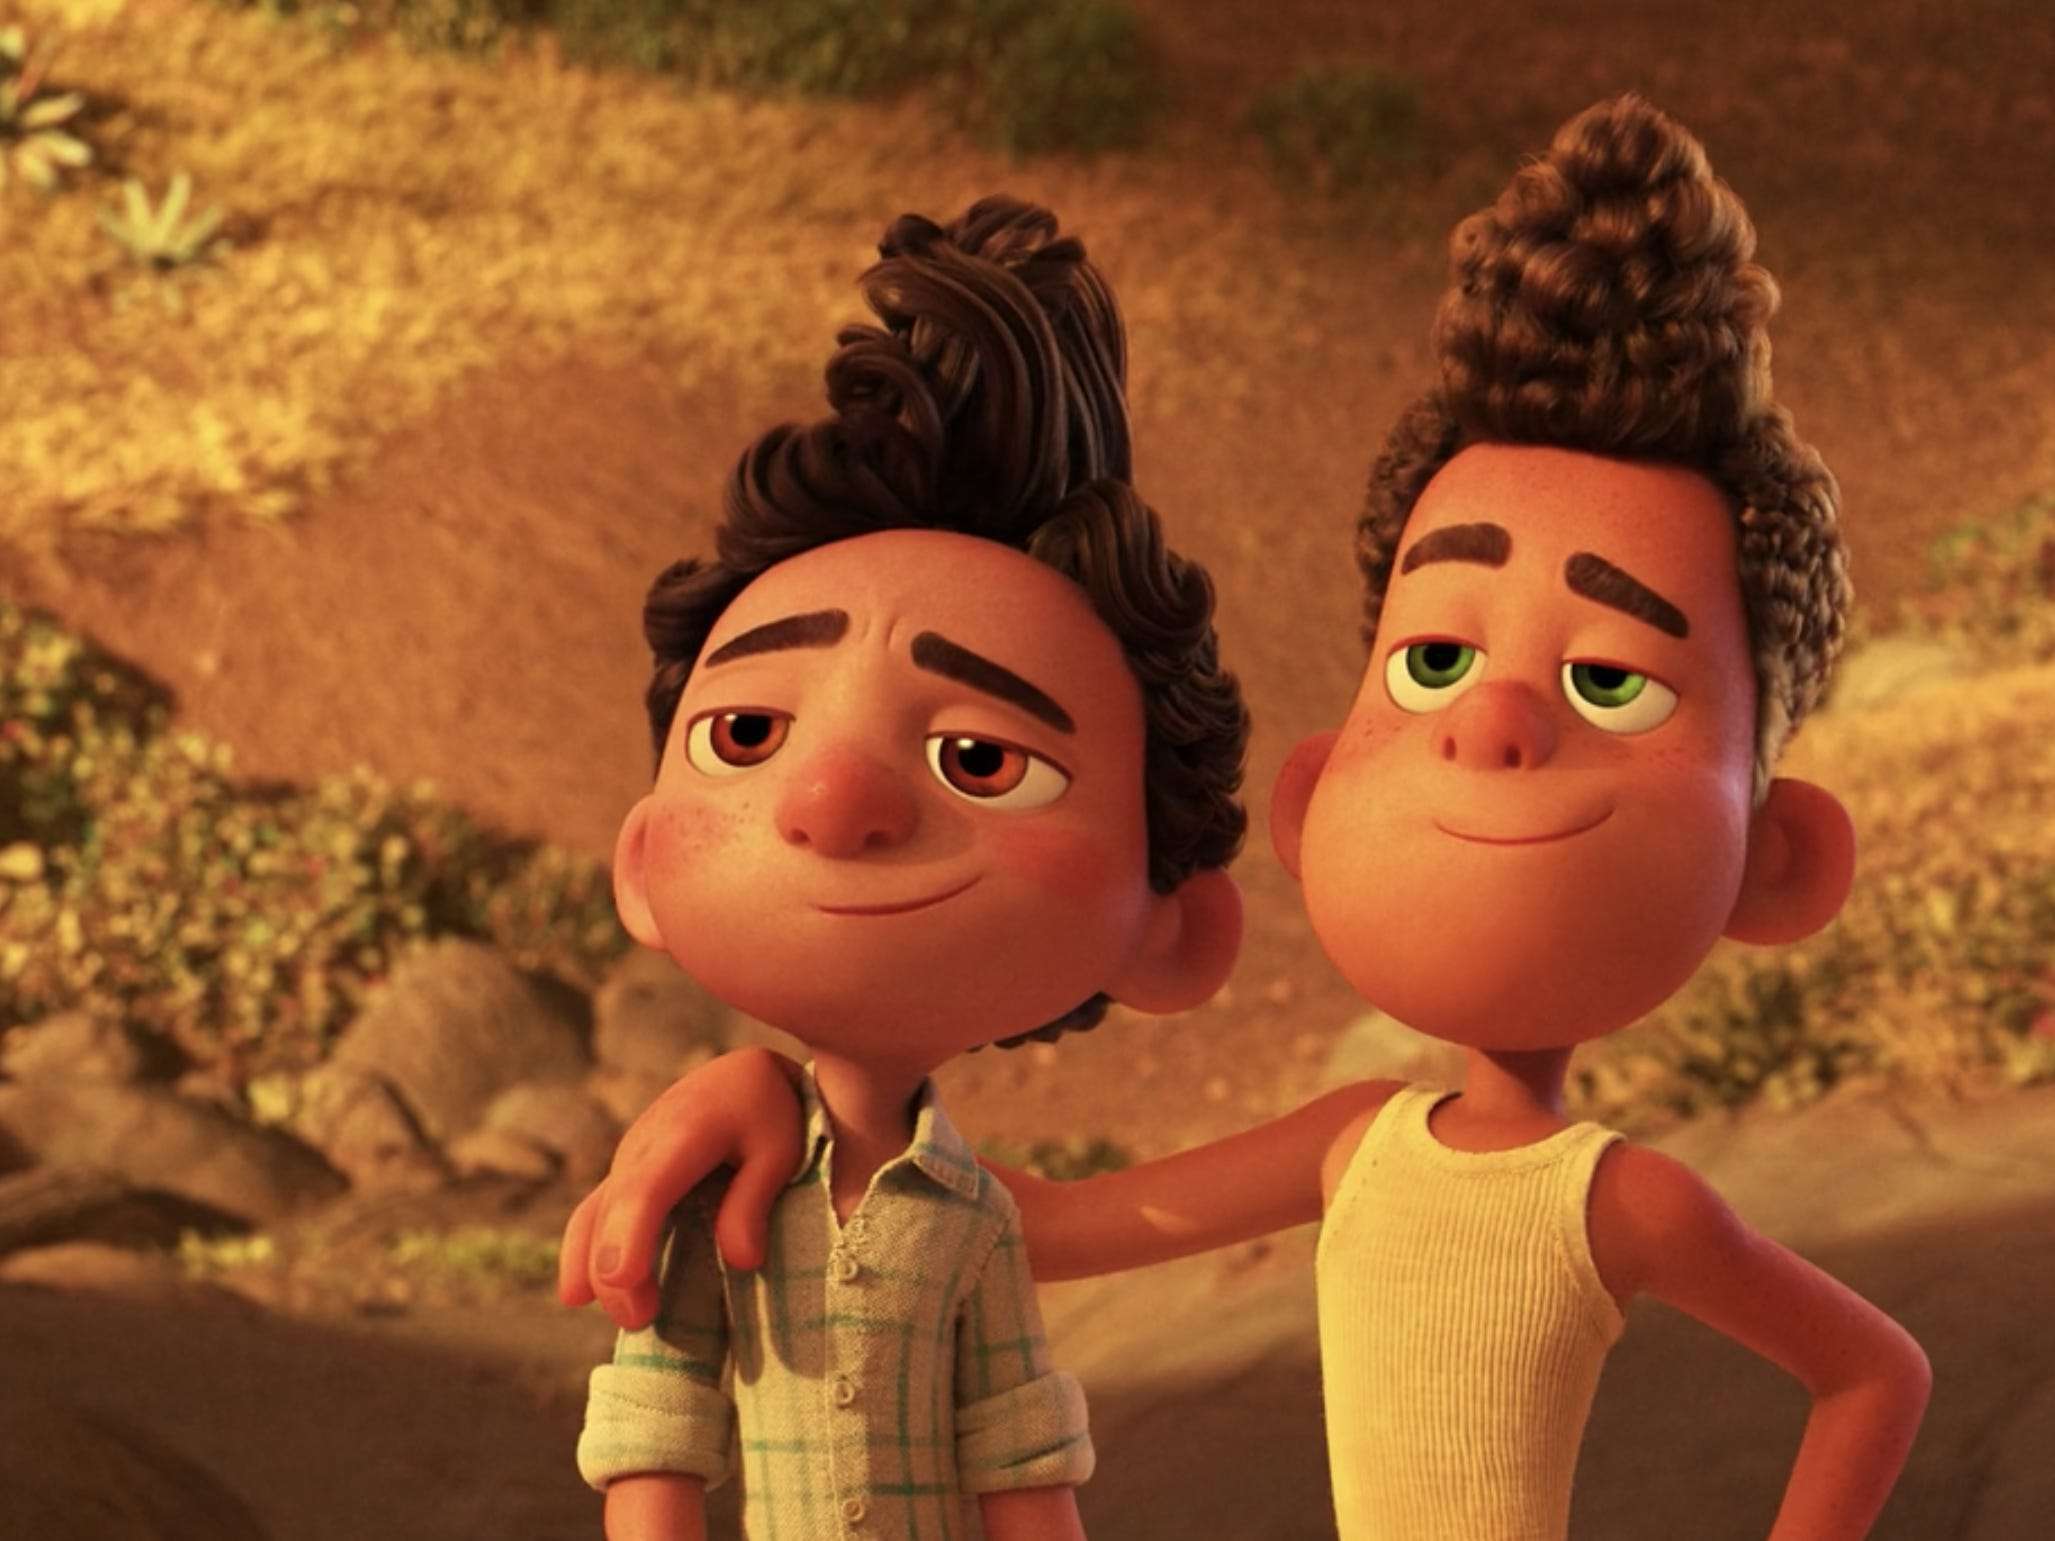 Luca' proves Disney's Pixar wasn't brave enough to fully commit to their first queer animated film. Business Insider India